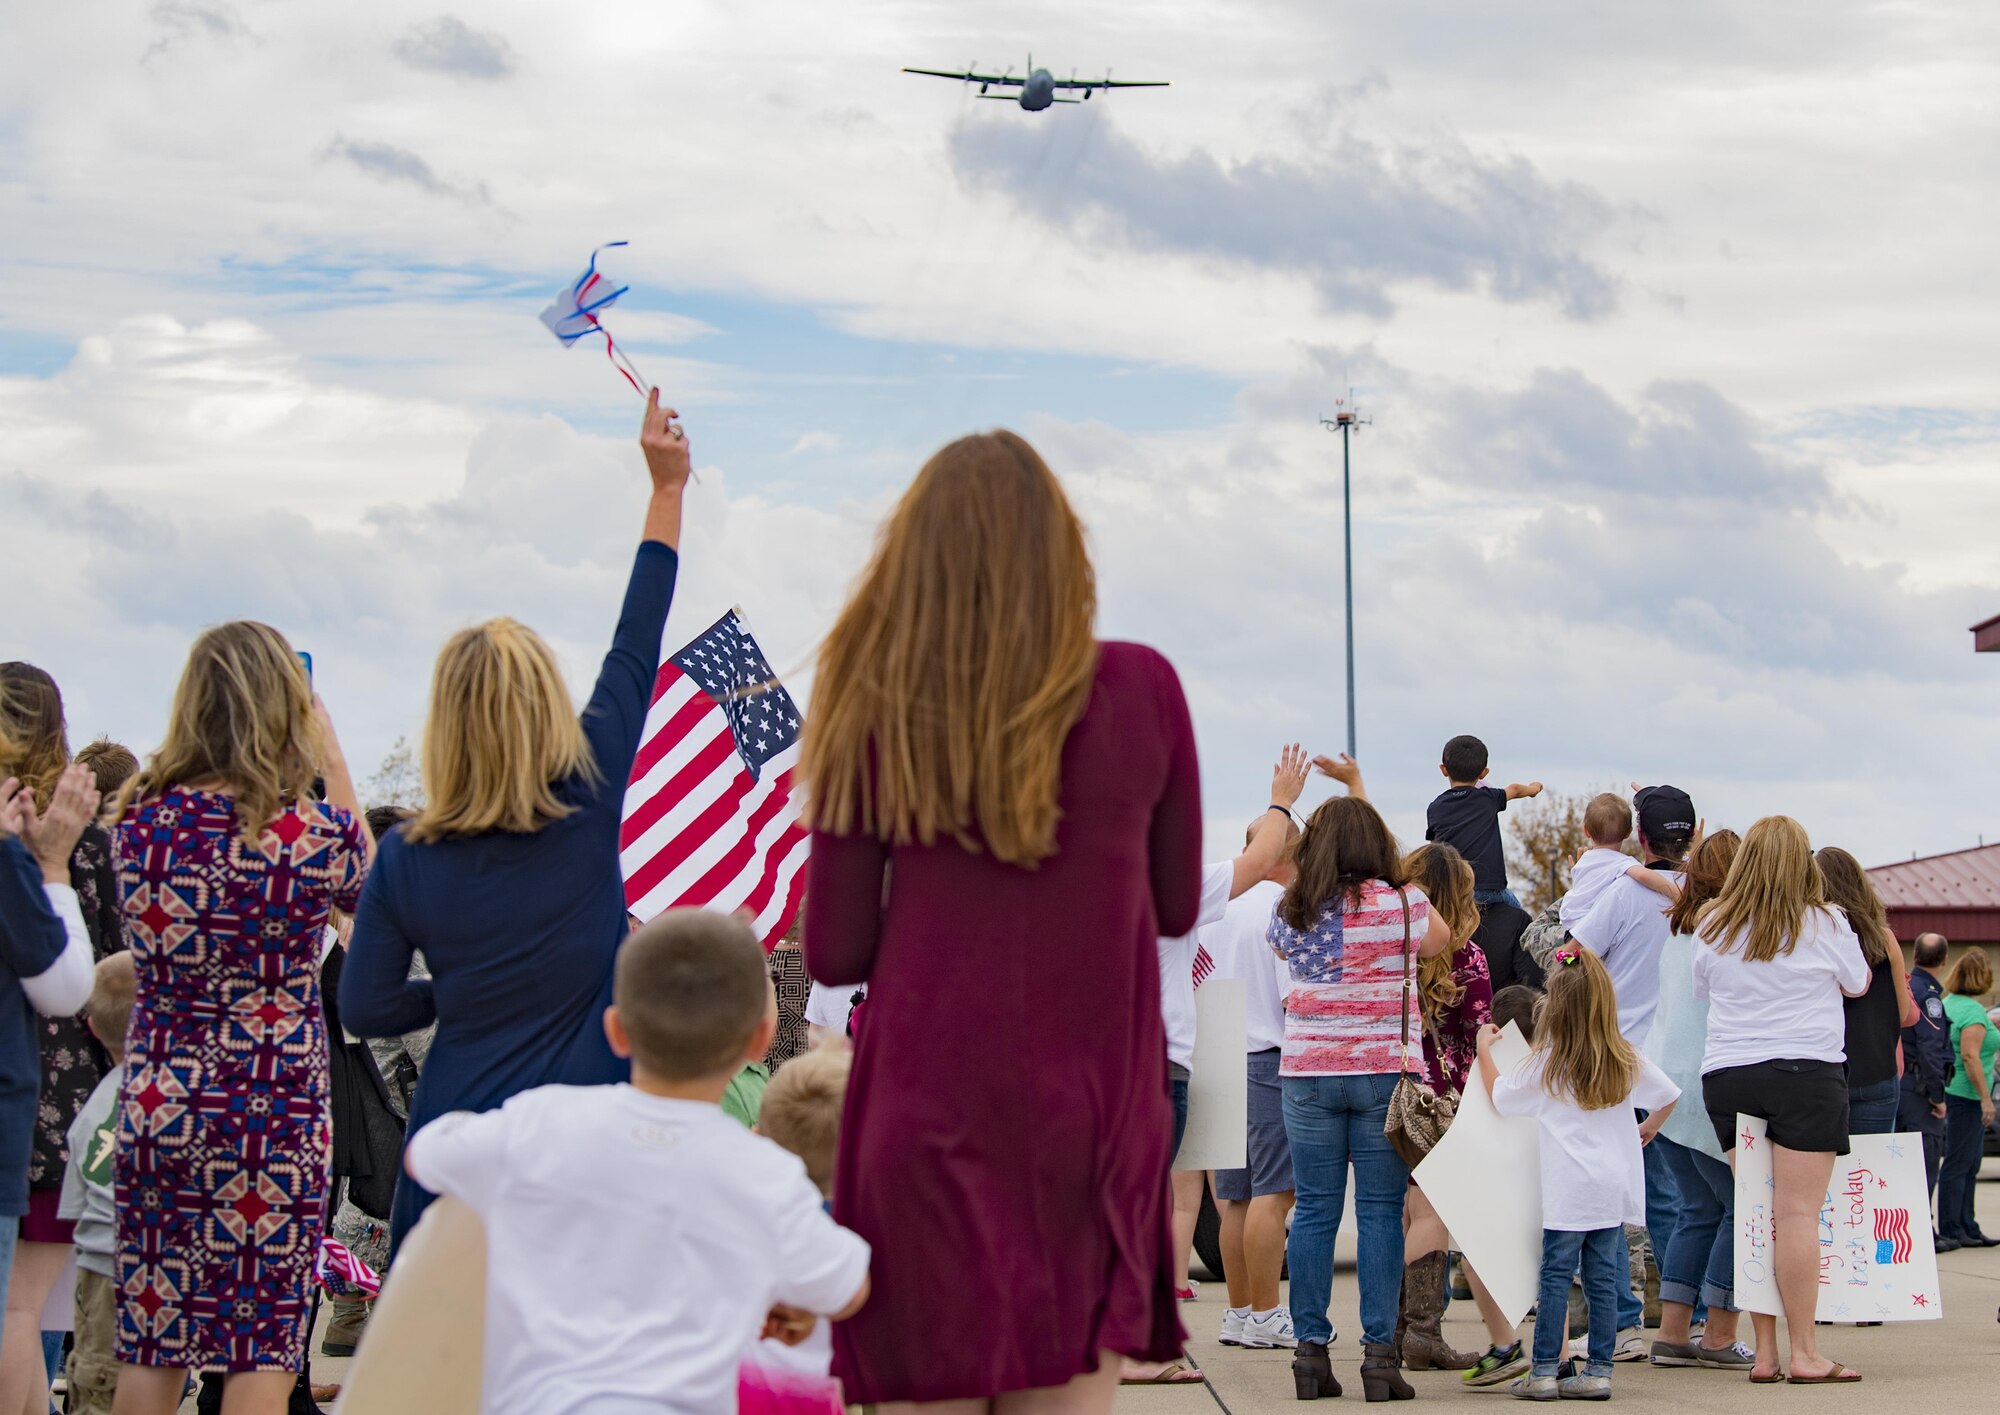 The remaining members of the 130th Airlift Wing’s overseas deployment in support of Operation Freedom Sentinel return home to McLaughlin Air National Guard Base, Charleston, W.Va. Nov. 4 through 7, 2017.